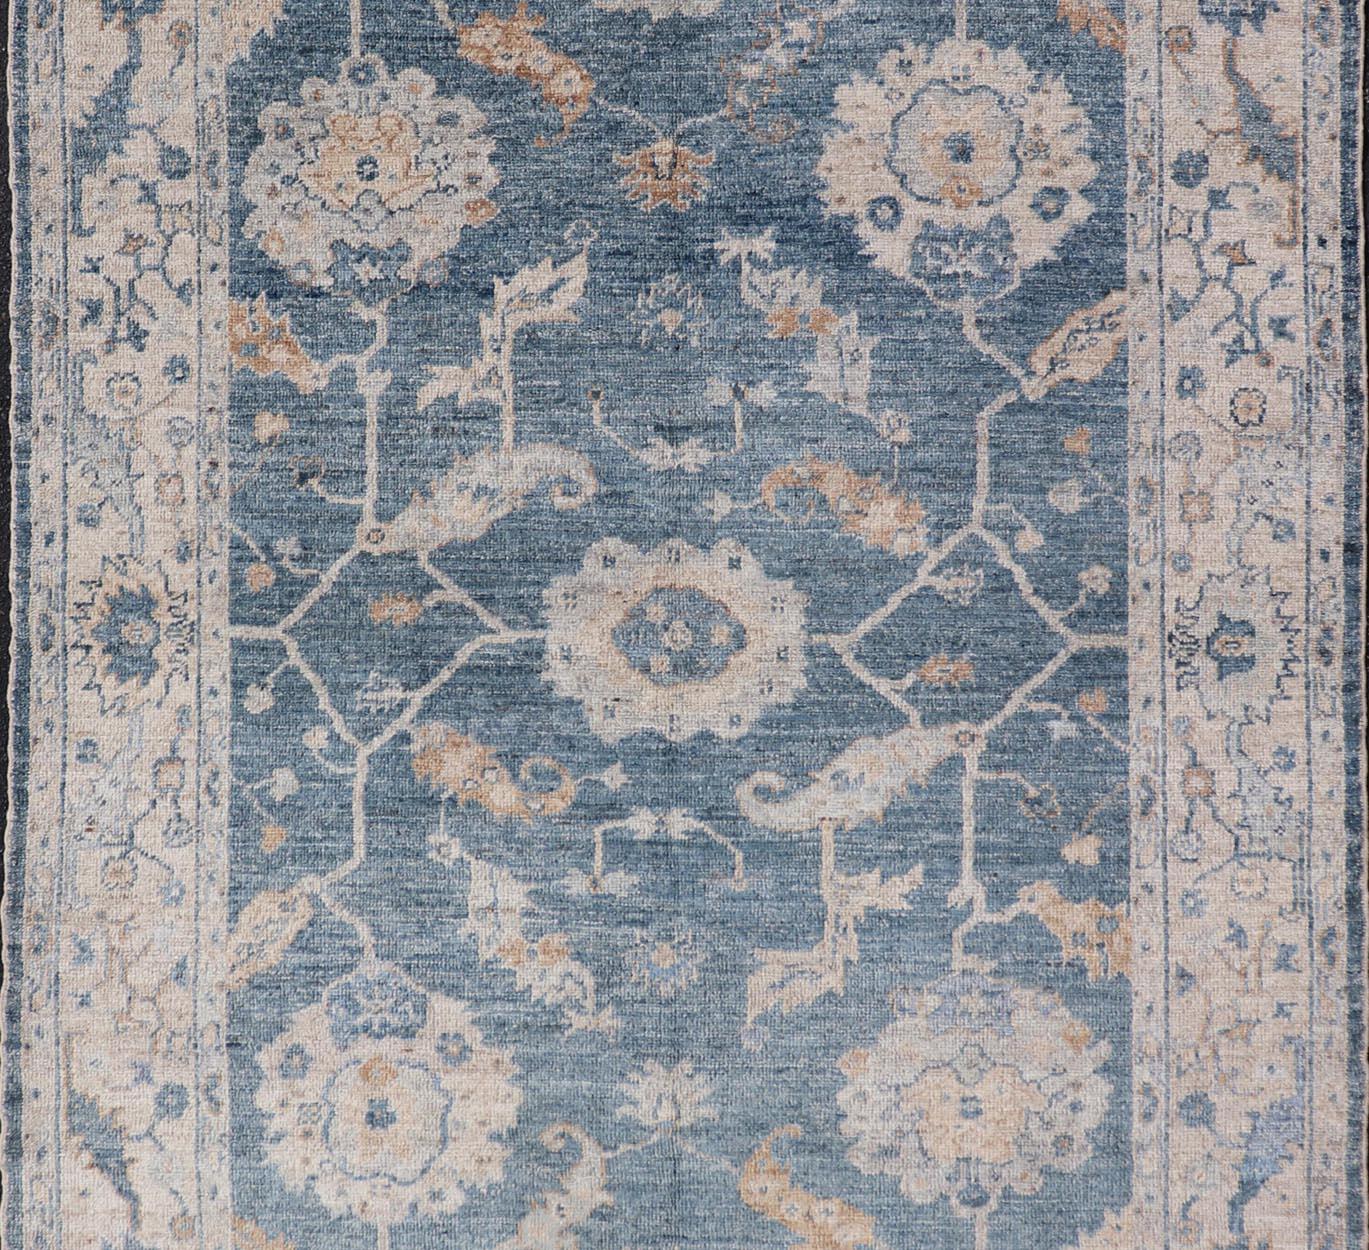 Angora Turkish Oushak Floral Design in Blue, Creams and Mocha Colors In Excellent Condition For Sale In Atlanta, GA